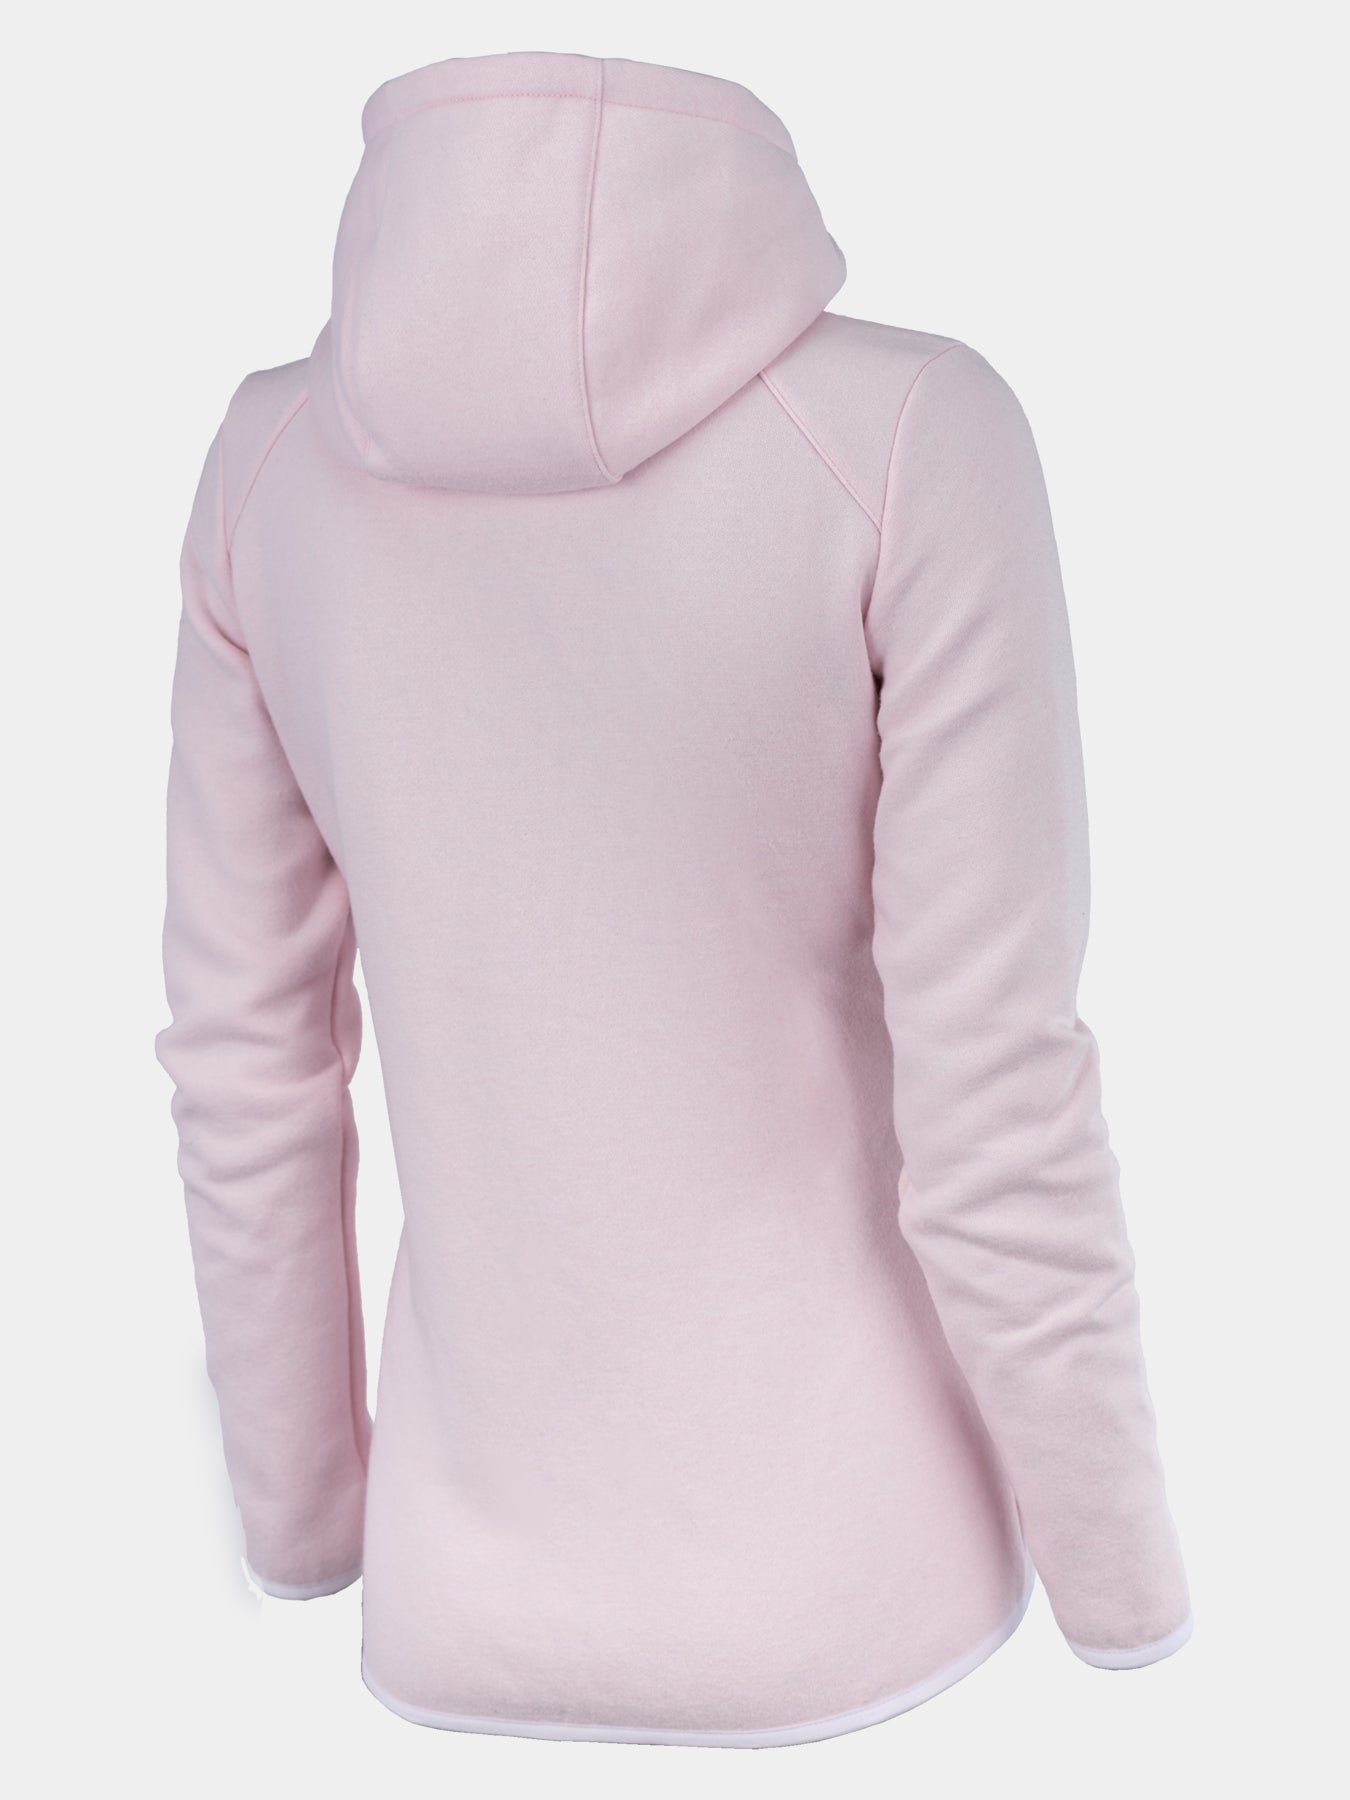 Revolution Tech Gym Running Hoodie For Women With Zip Pockets - Pink ...